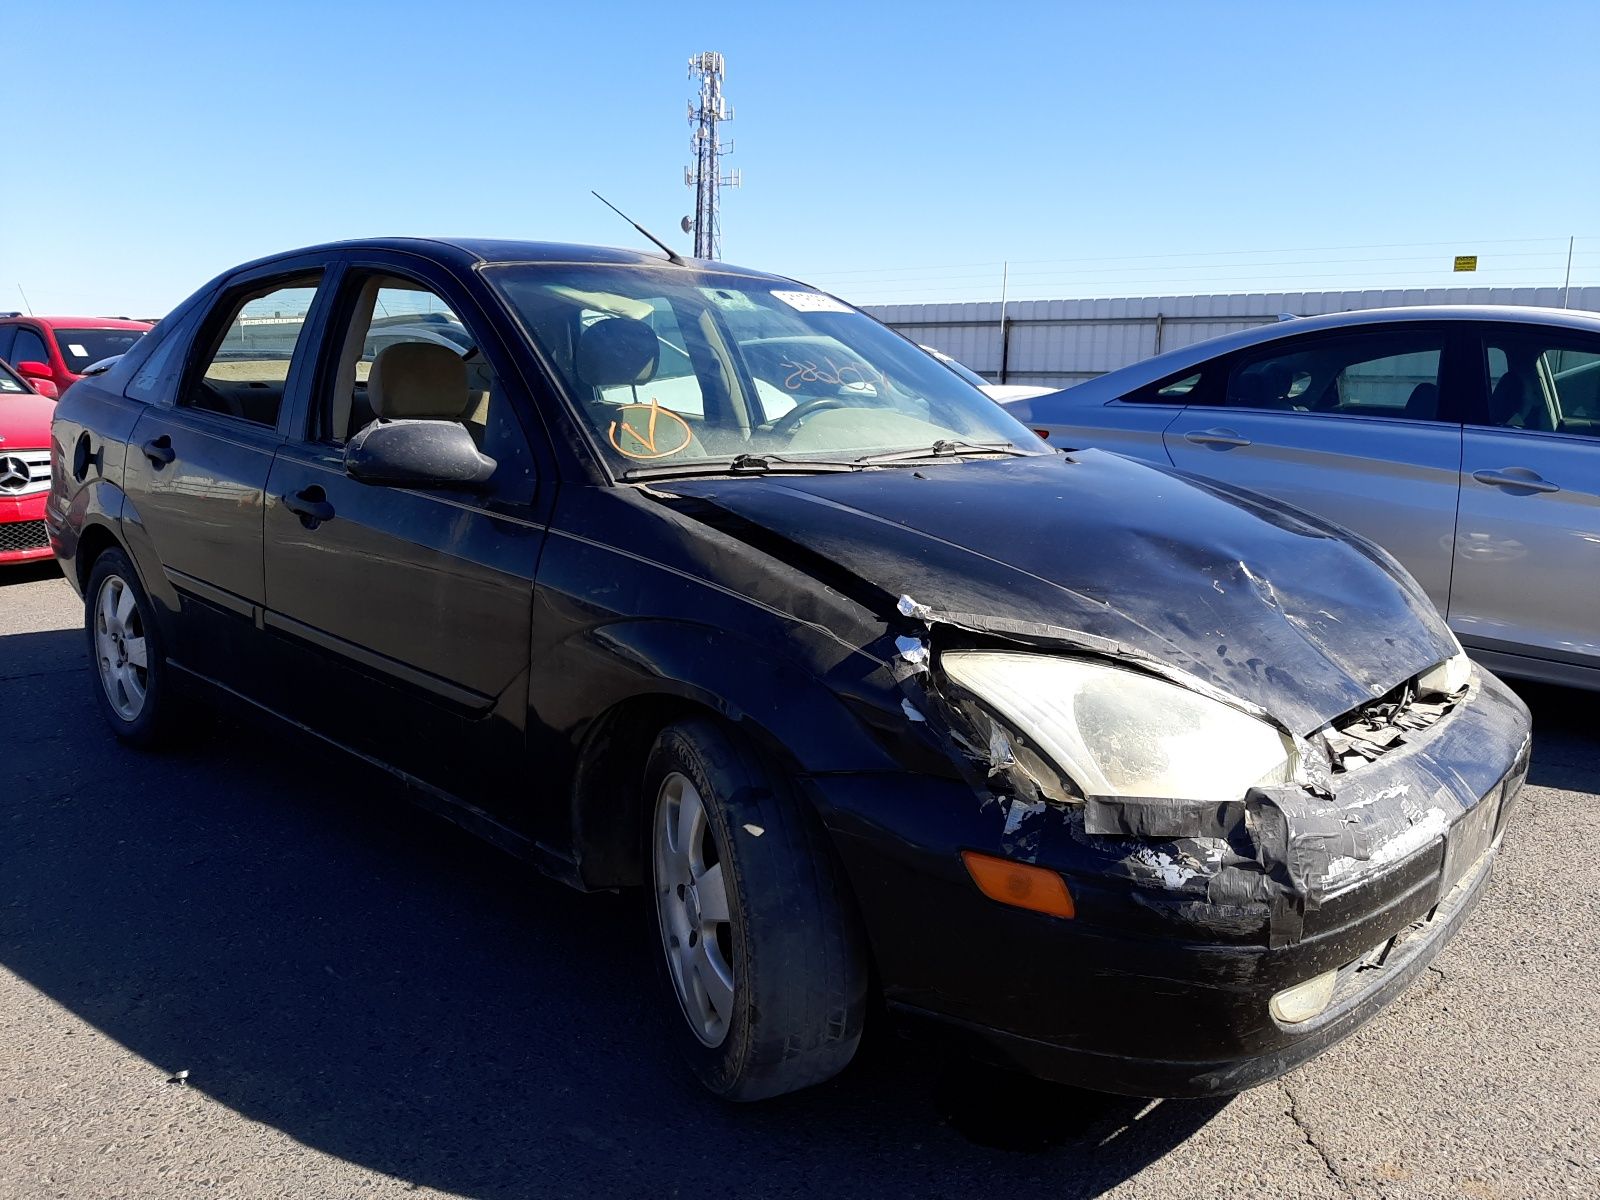 1 of 1FAHP38312W132835 Ford Focus 2002